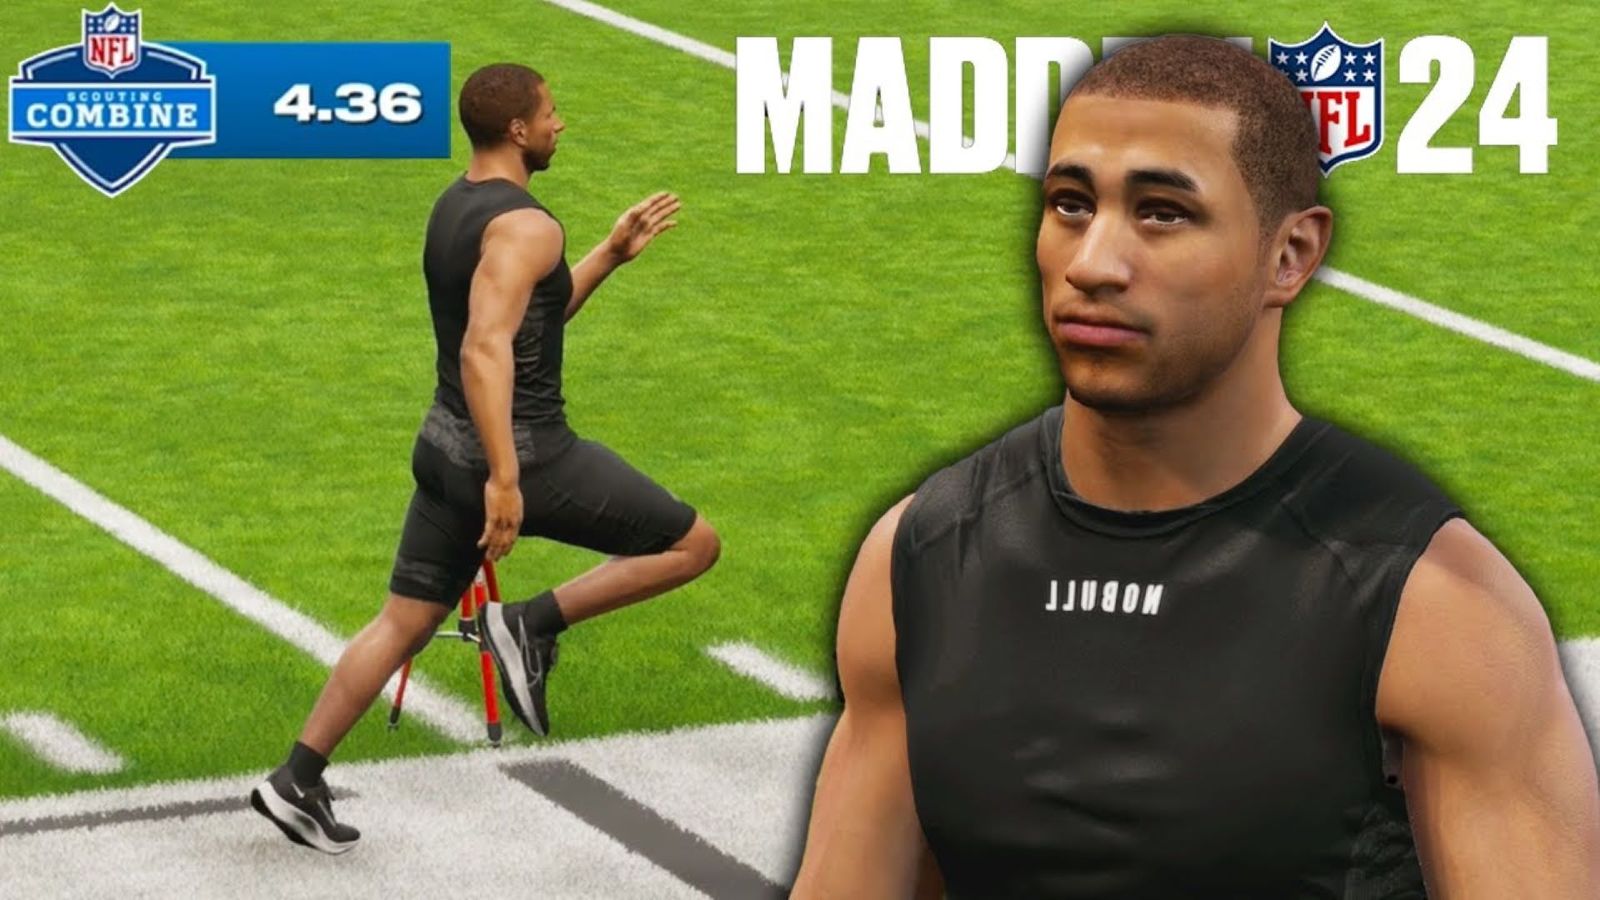 The 40-yard dash is an important part of the Madden 24 drafting guide